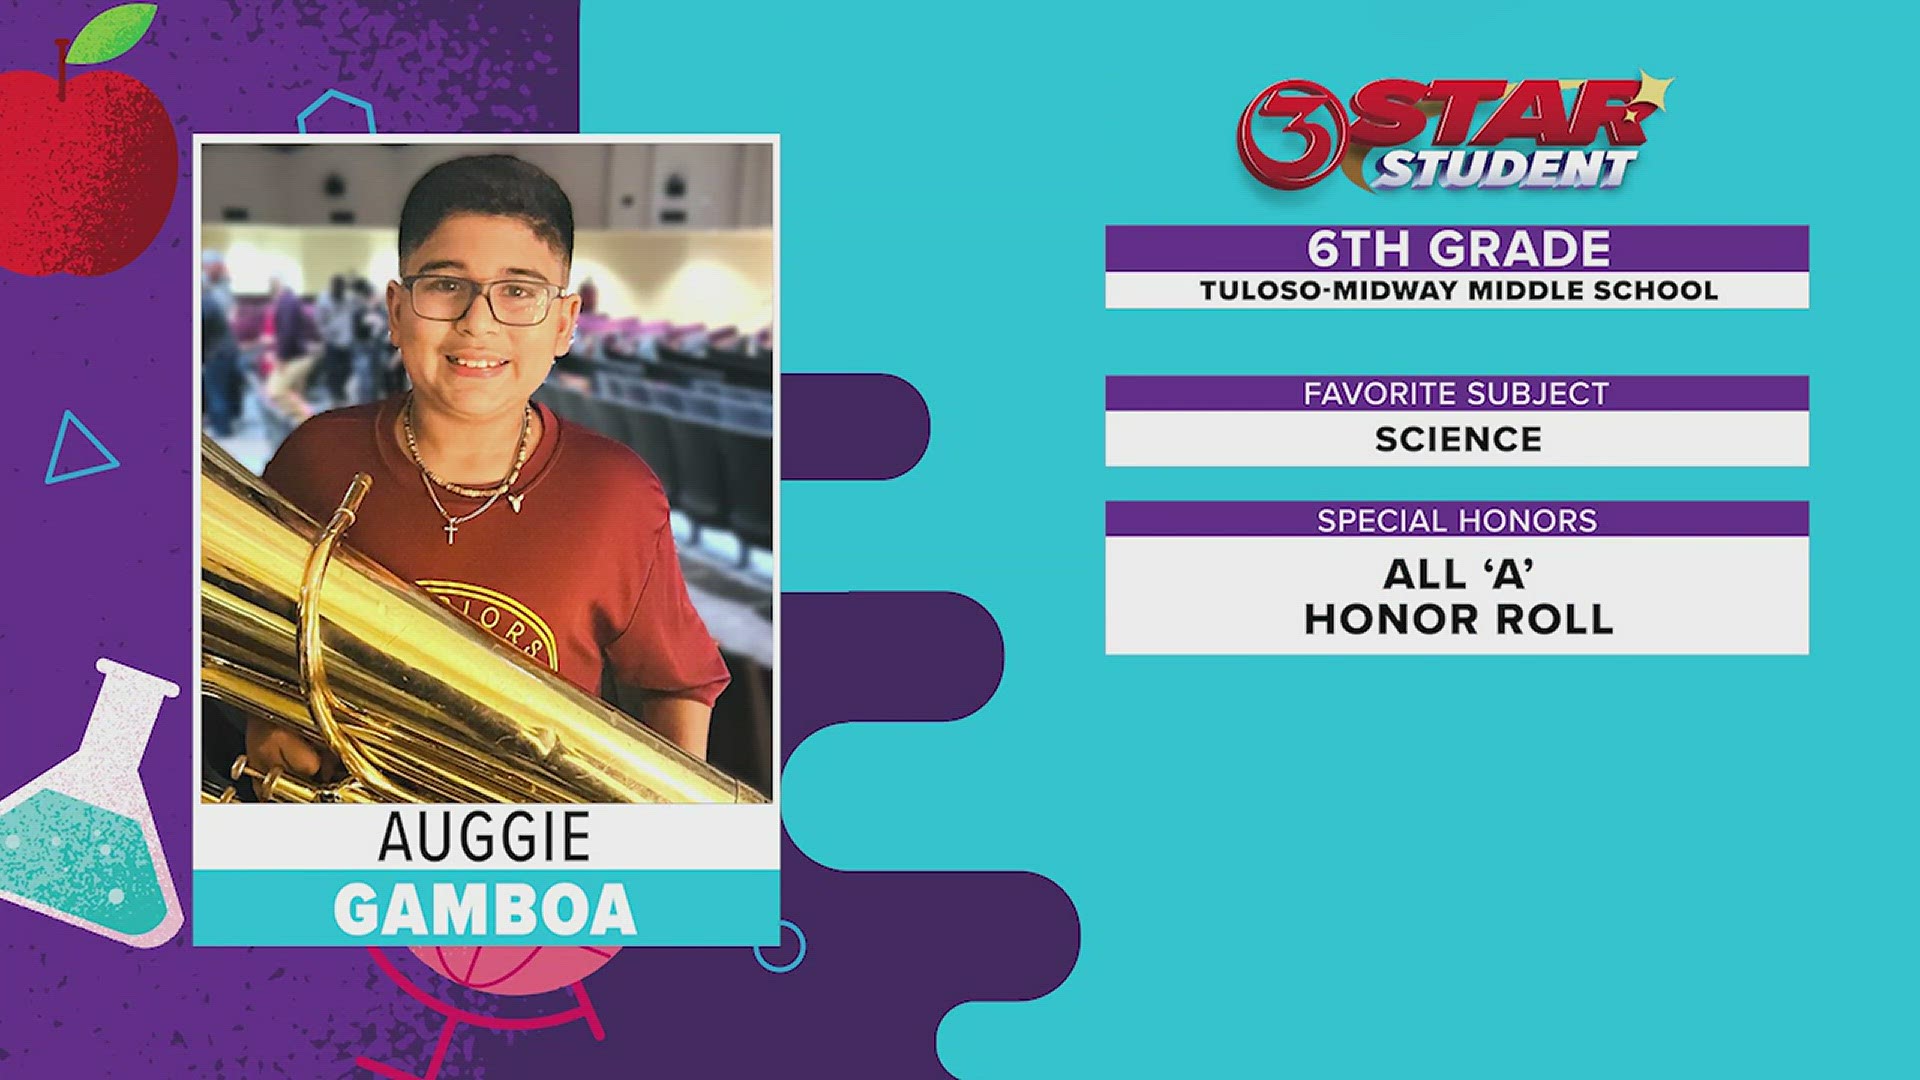 Auggie Gamboa is in the 6th grade at Tuloso-Midway. He is a second-chair tuba player and an All 'A' Honor Roll student!